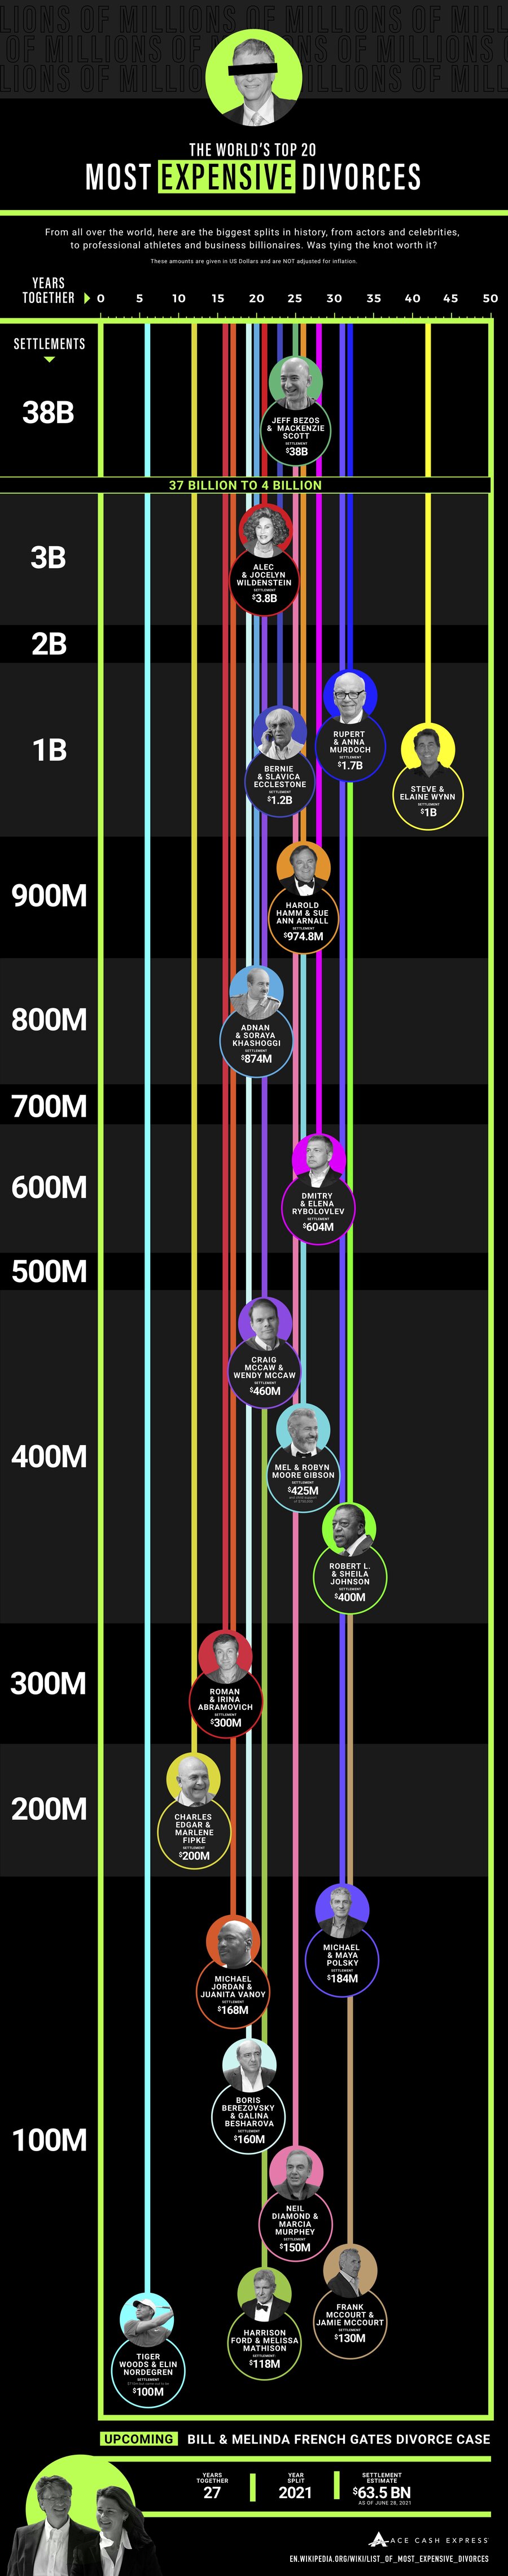 Most Expensive Divorces in History  Infographic